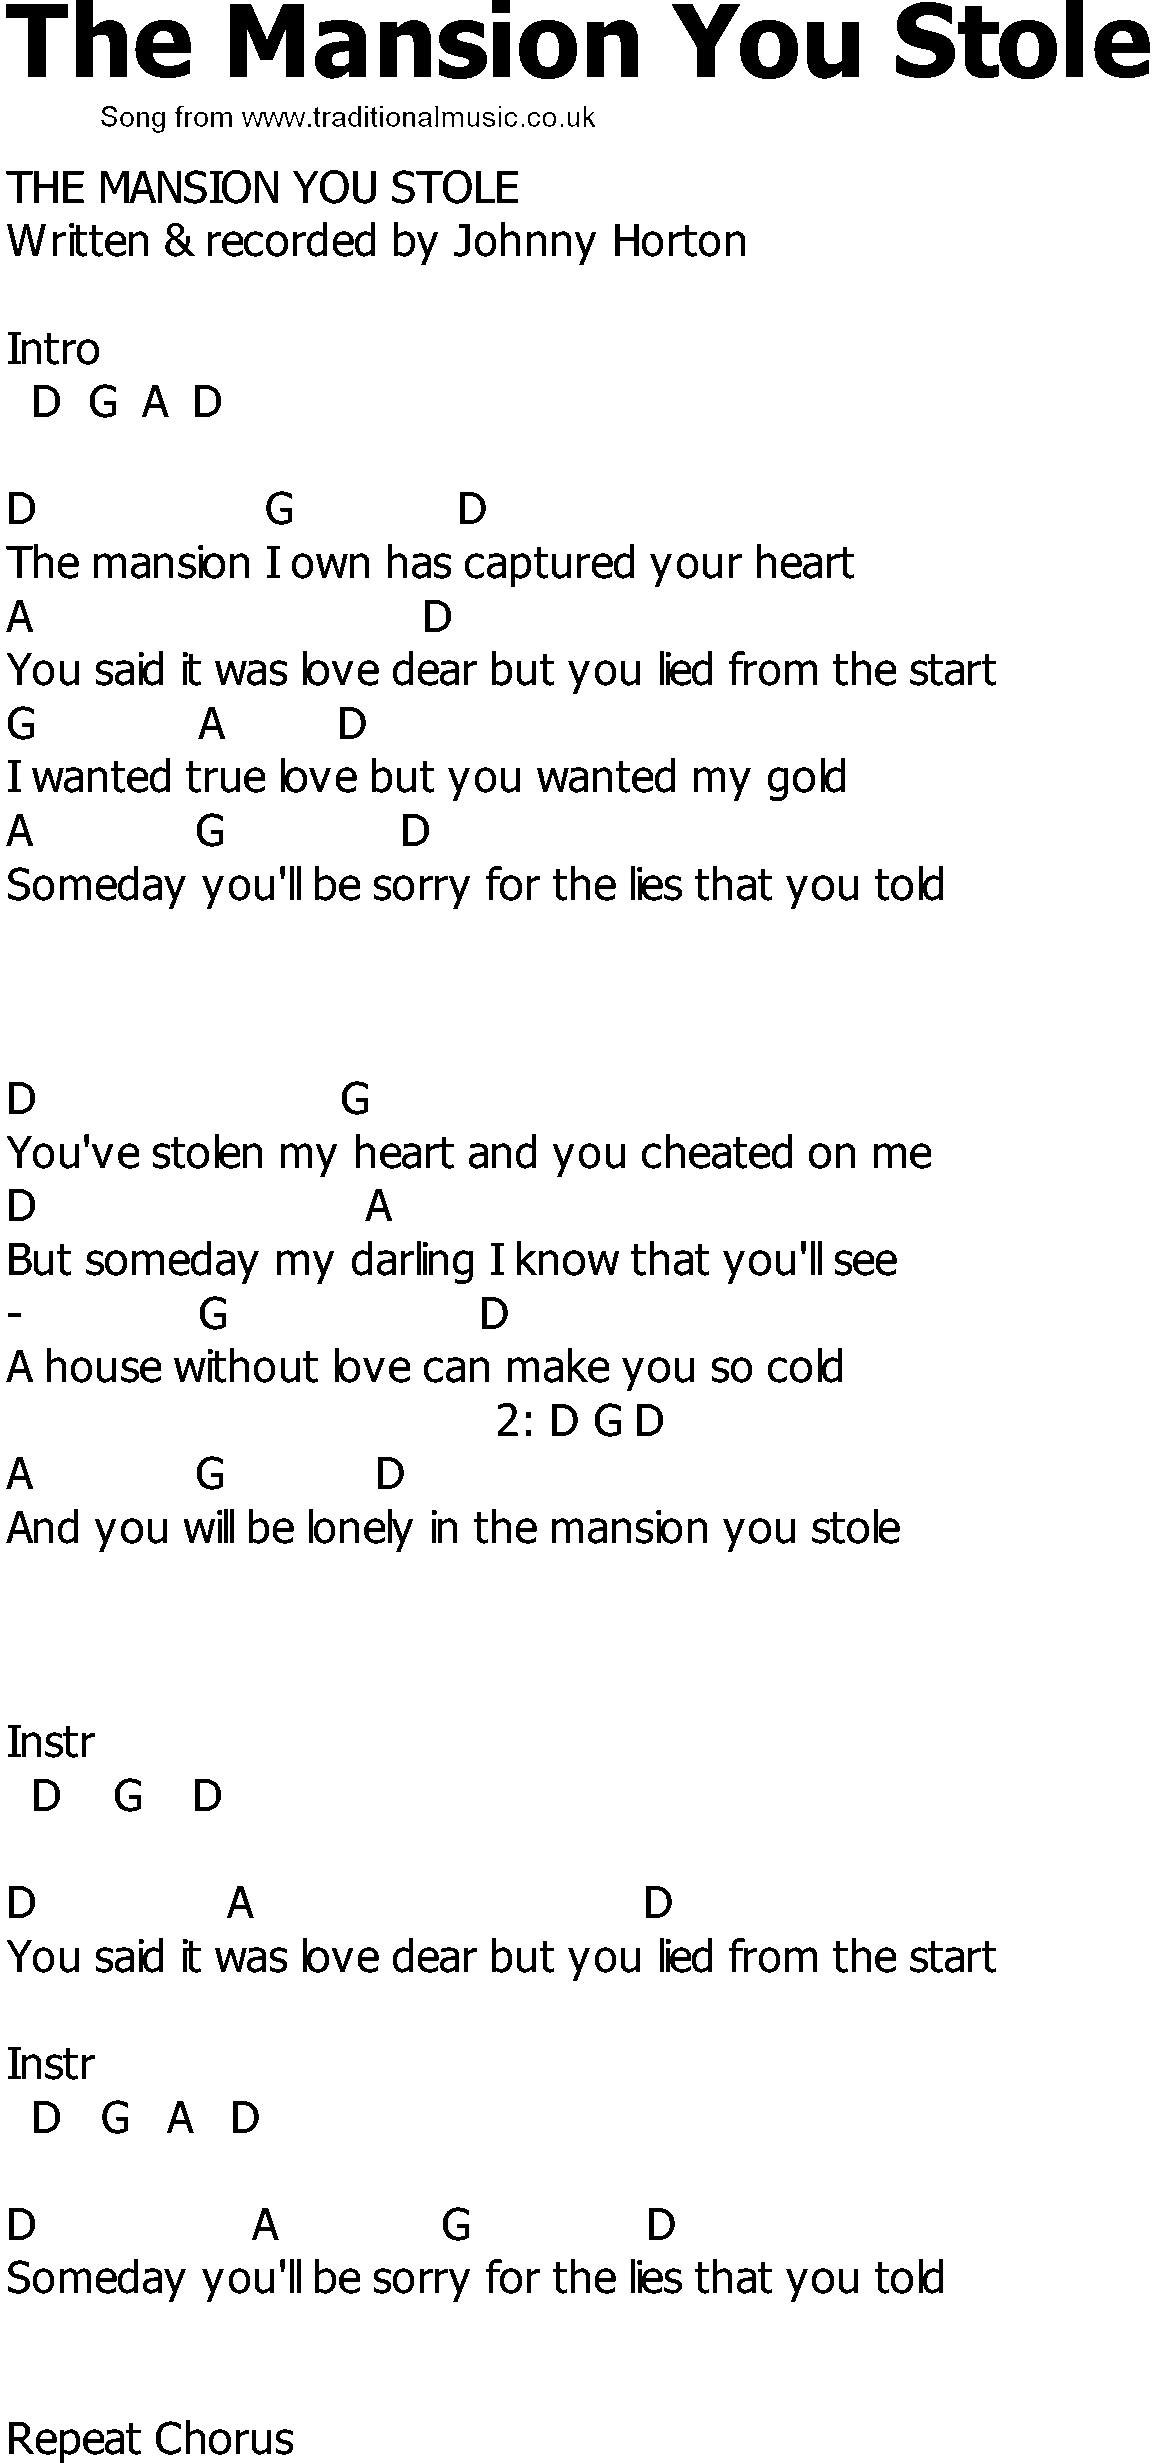 Old Country song lyrics with chords - The Mansion You Stole